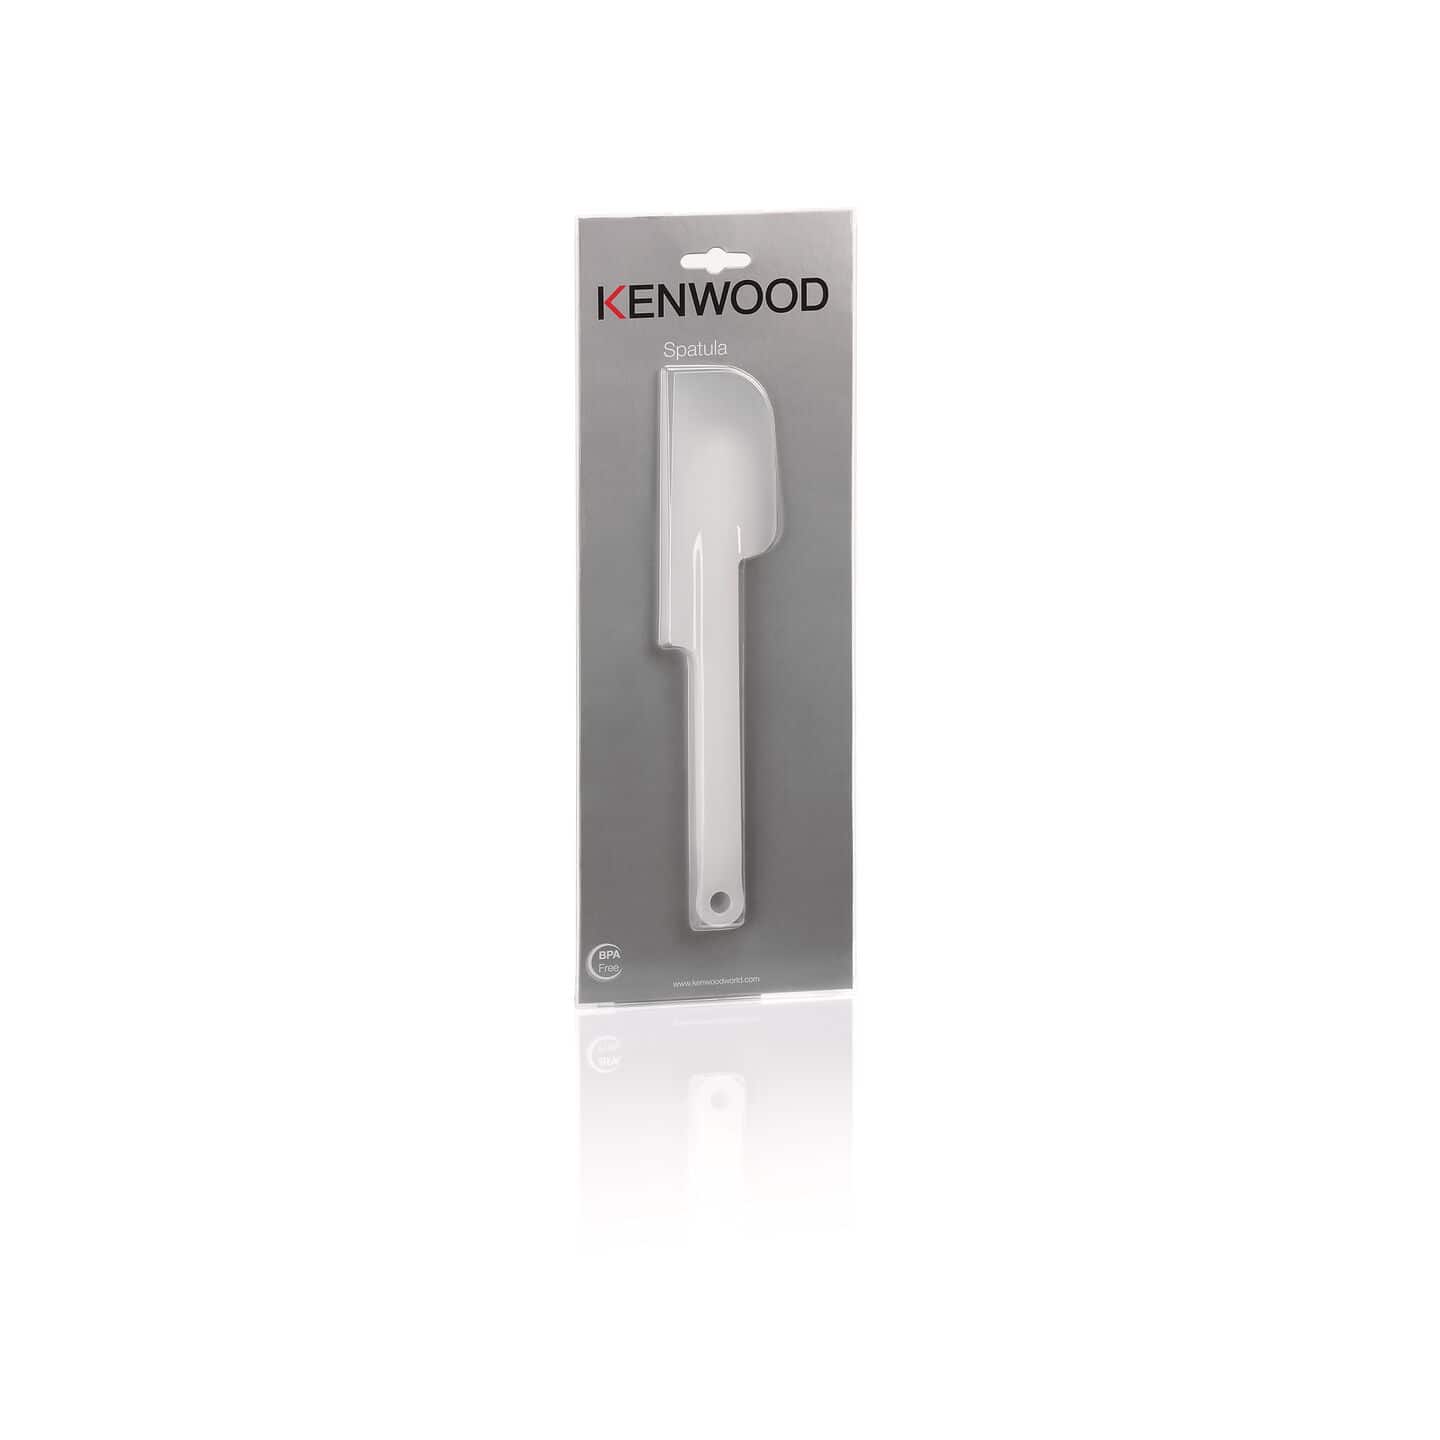 From kenwoodworld.com